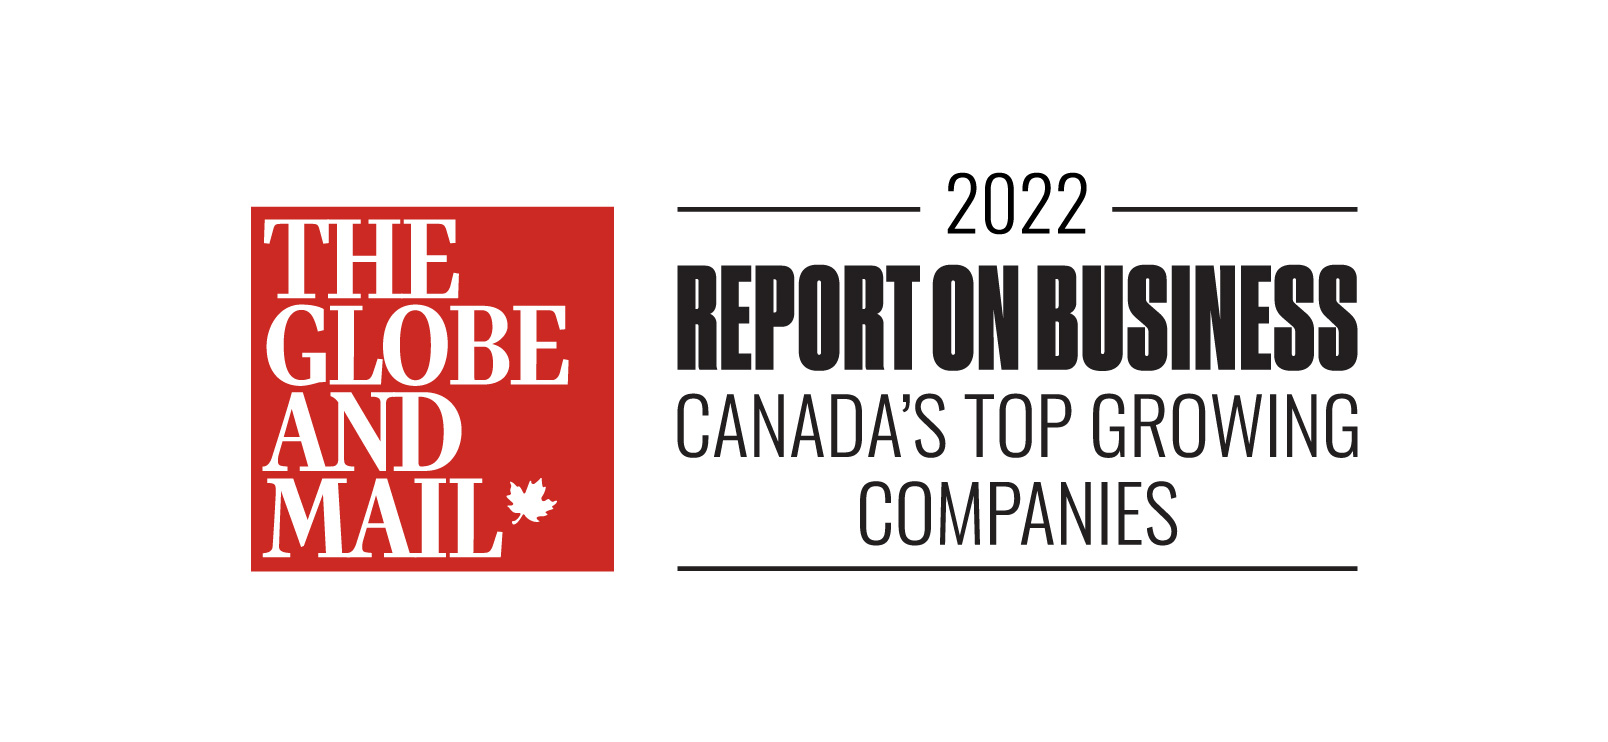 The Globe and Mail logo is shown to the left of the image. The right side of the image reads: 2022 Report on Business Canada's Top Growing Companies.